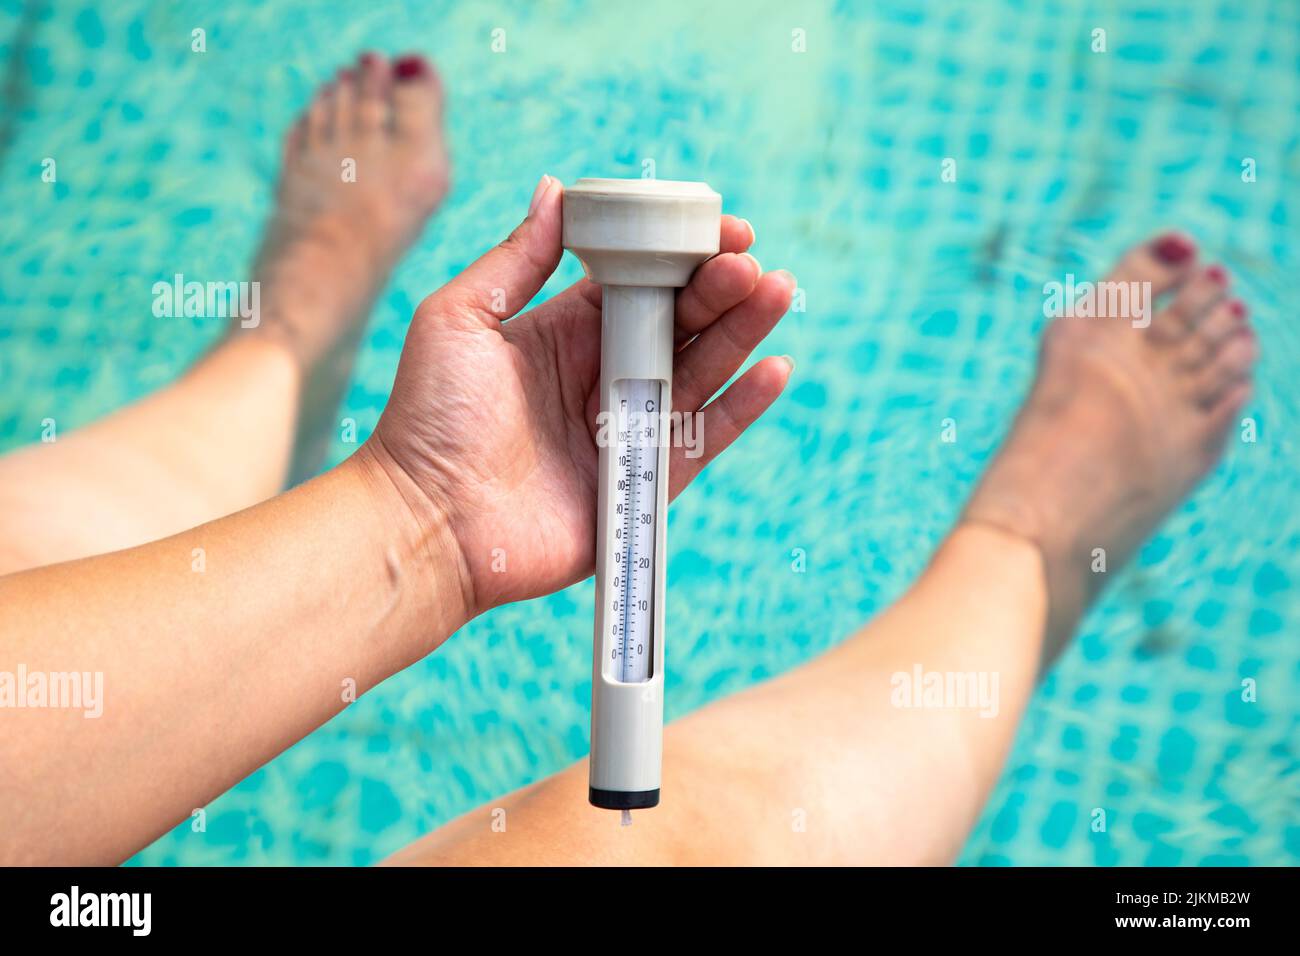 1,784 Pool Thermometer Images, Stock Photos, 3D objects, & Vectors